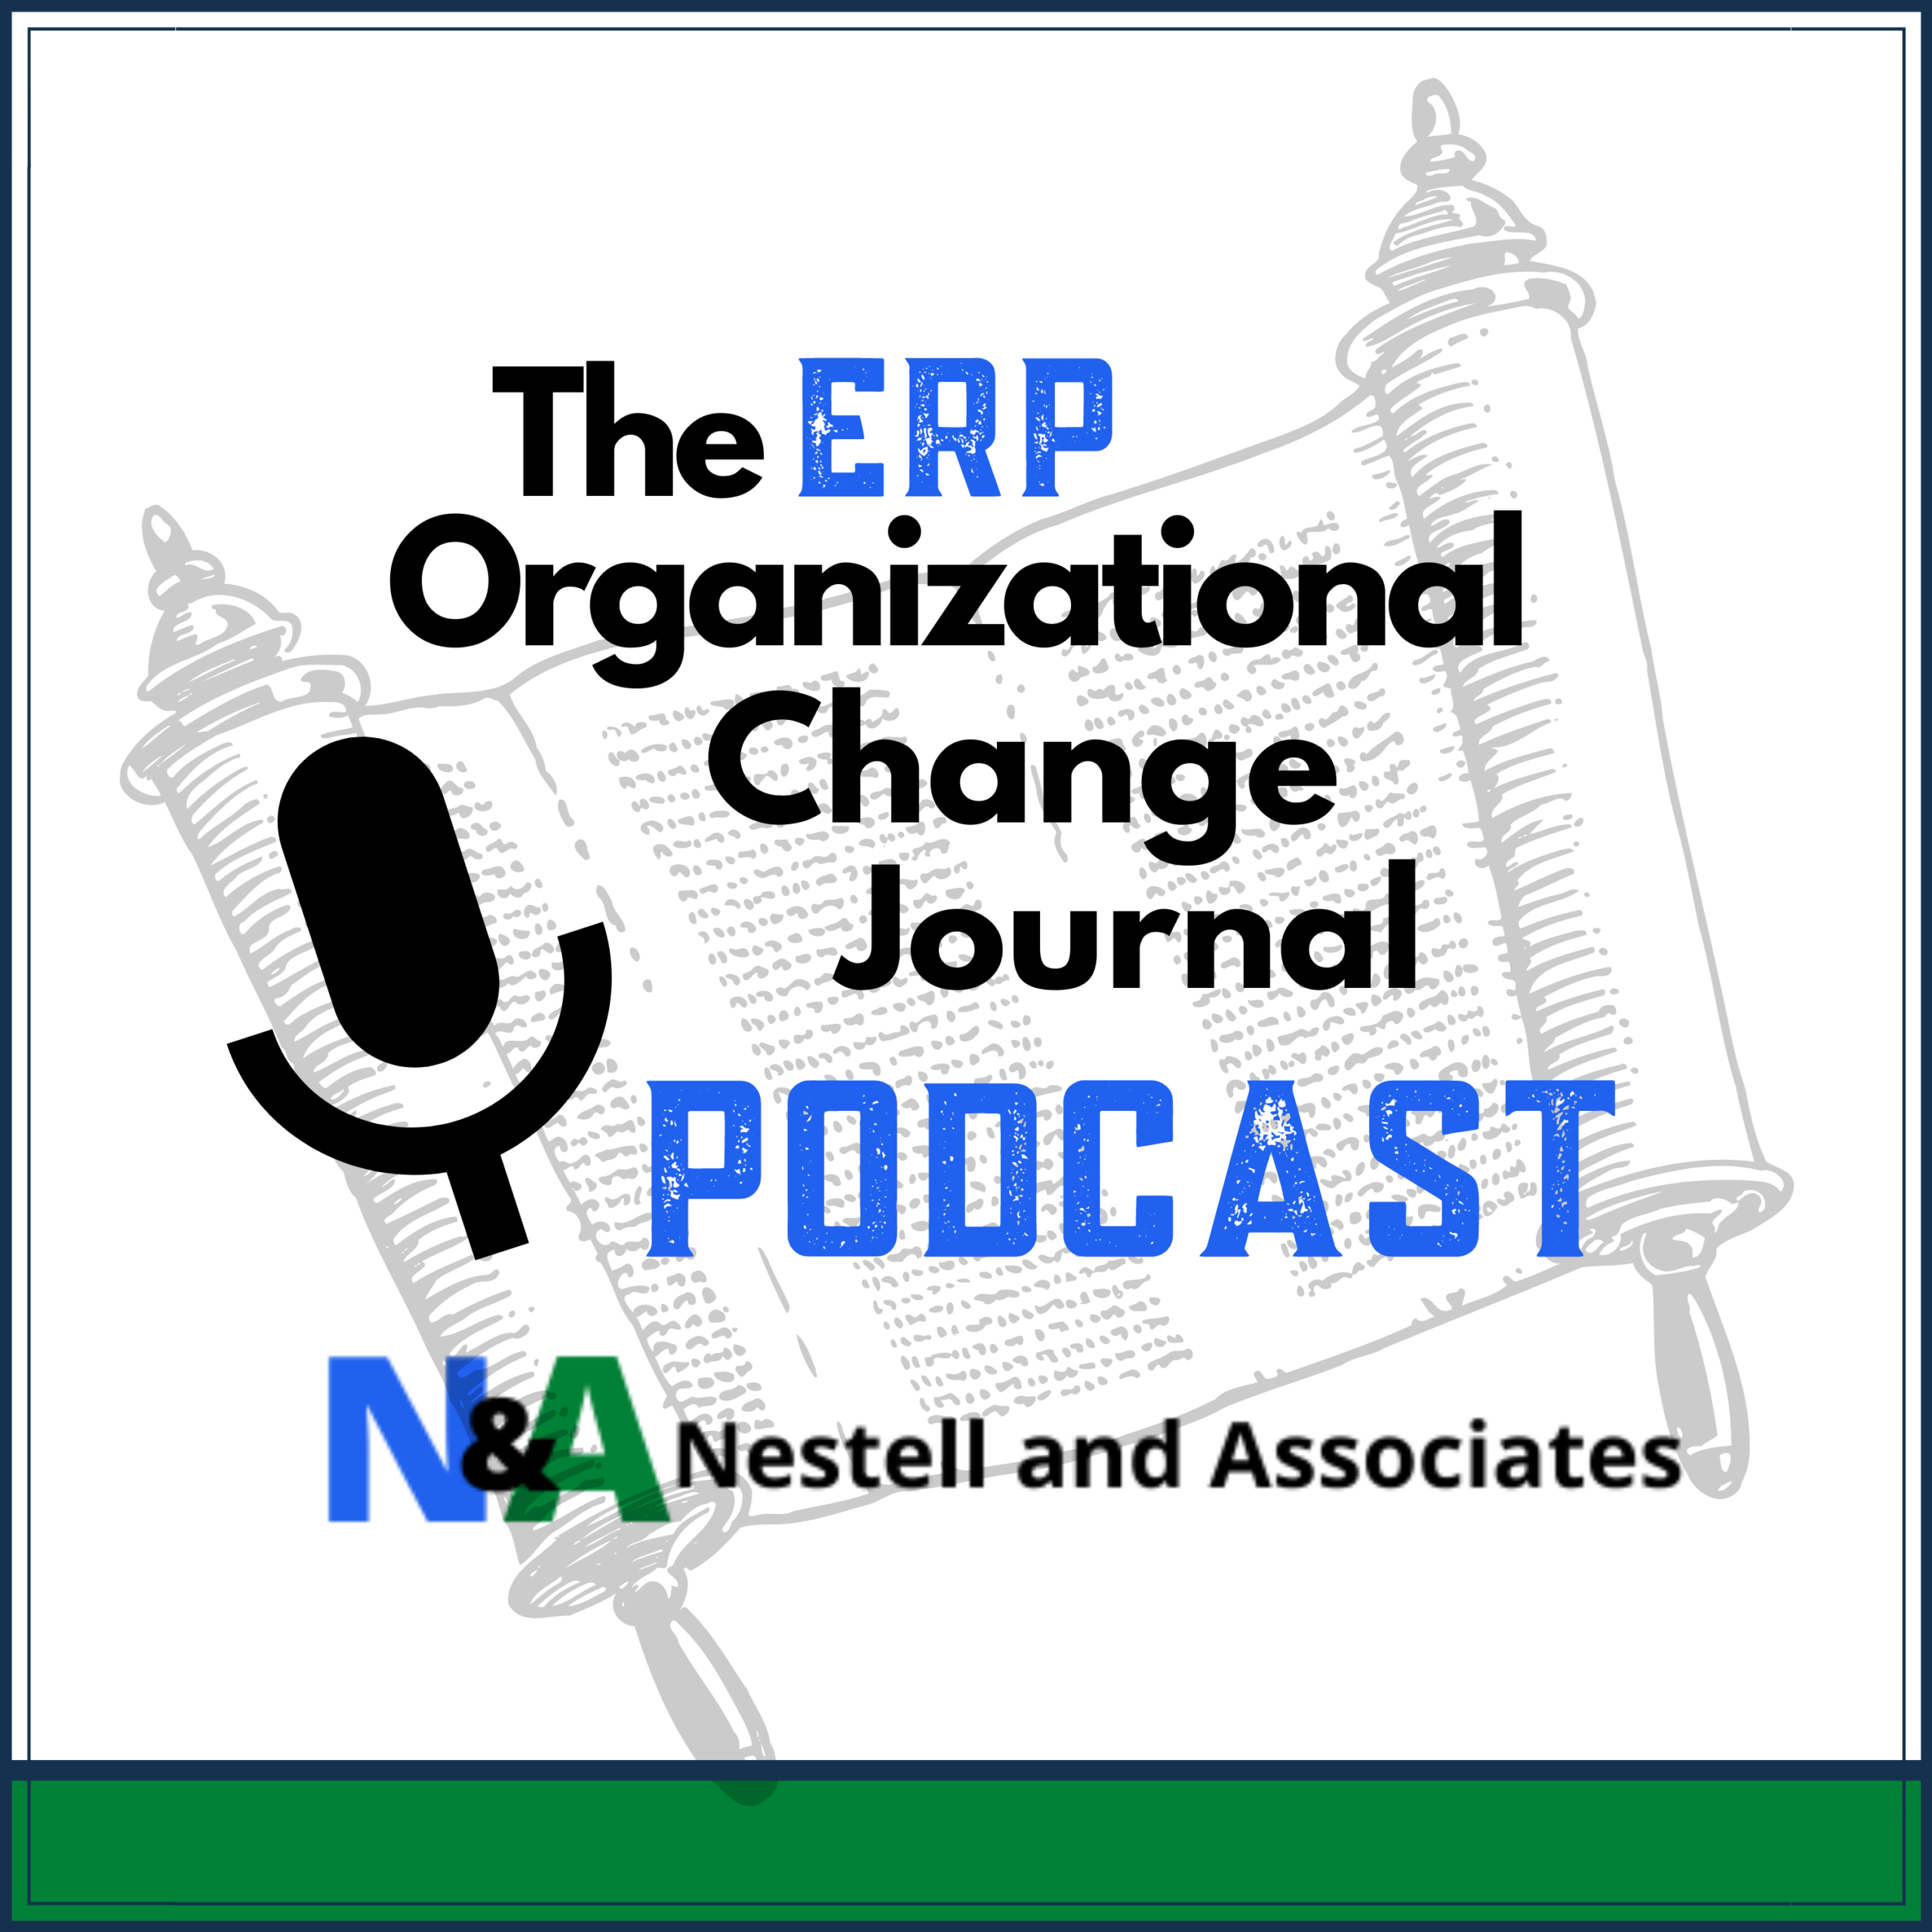 The ERP Organizational Change Journal Podcast